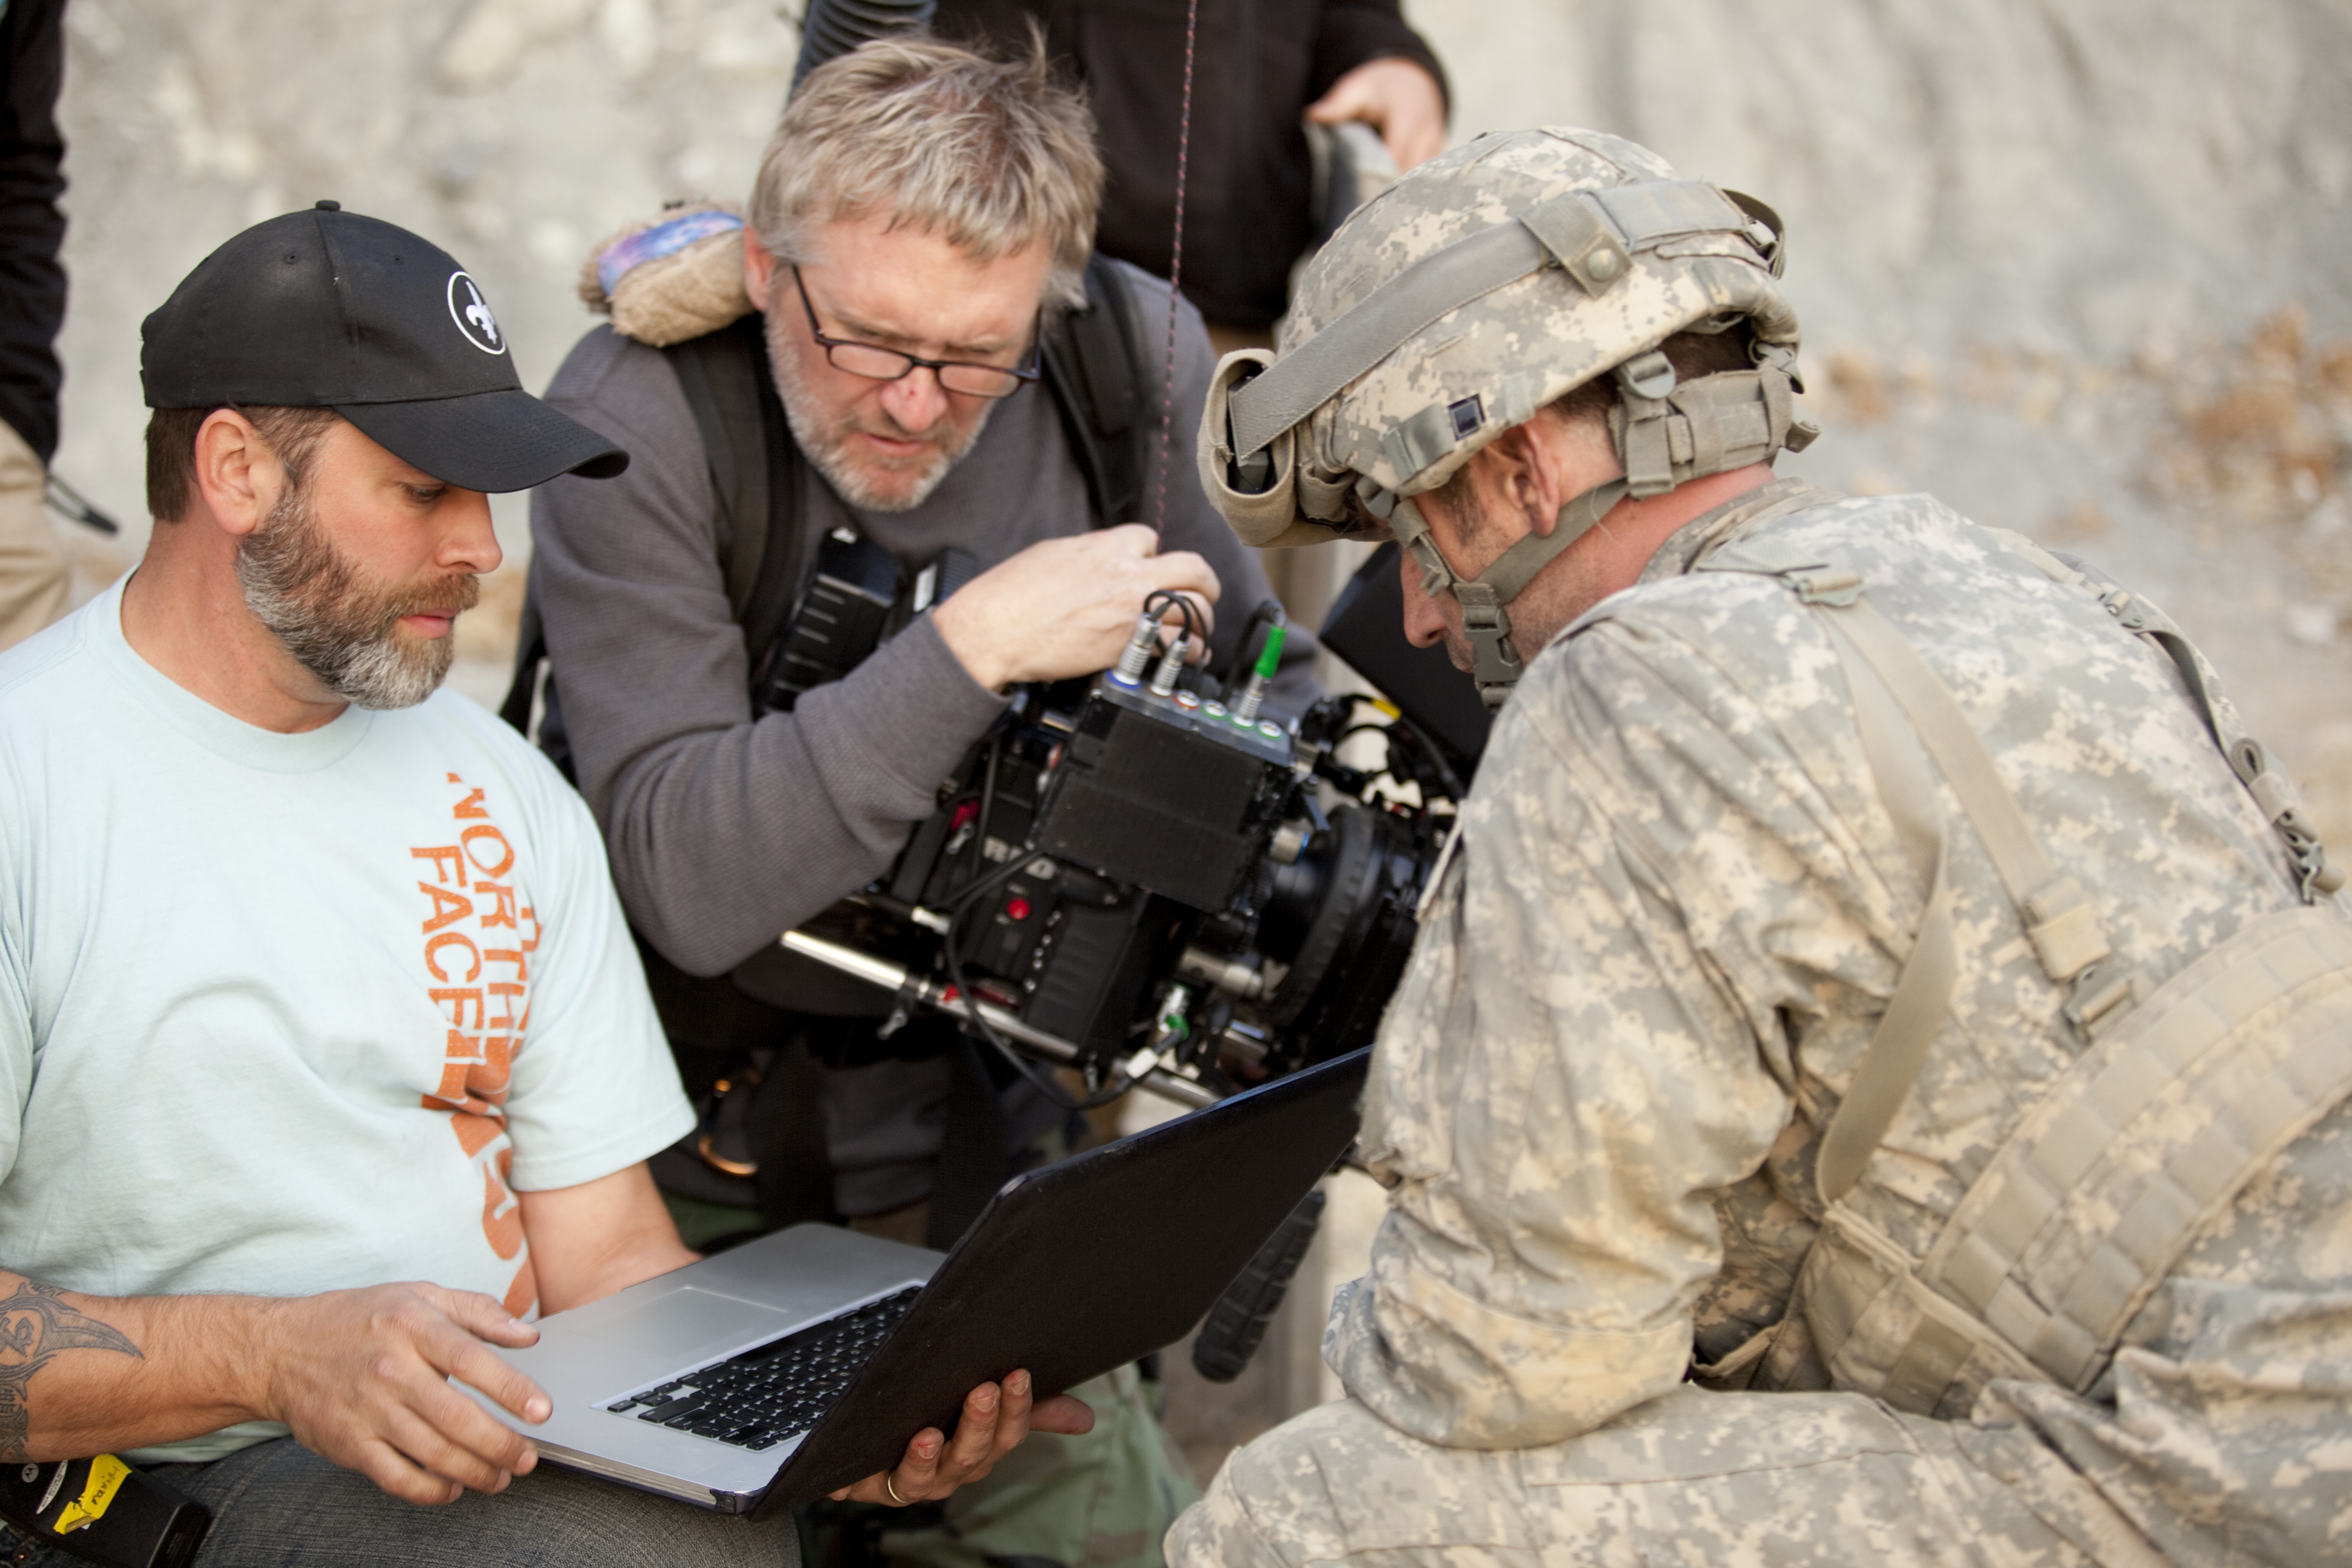 Discussing shots with Director Shane Sooter and actor Phil Russell on the set of Acts of God 2012